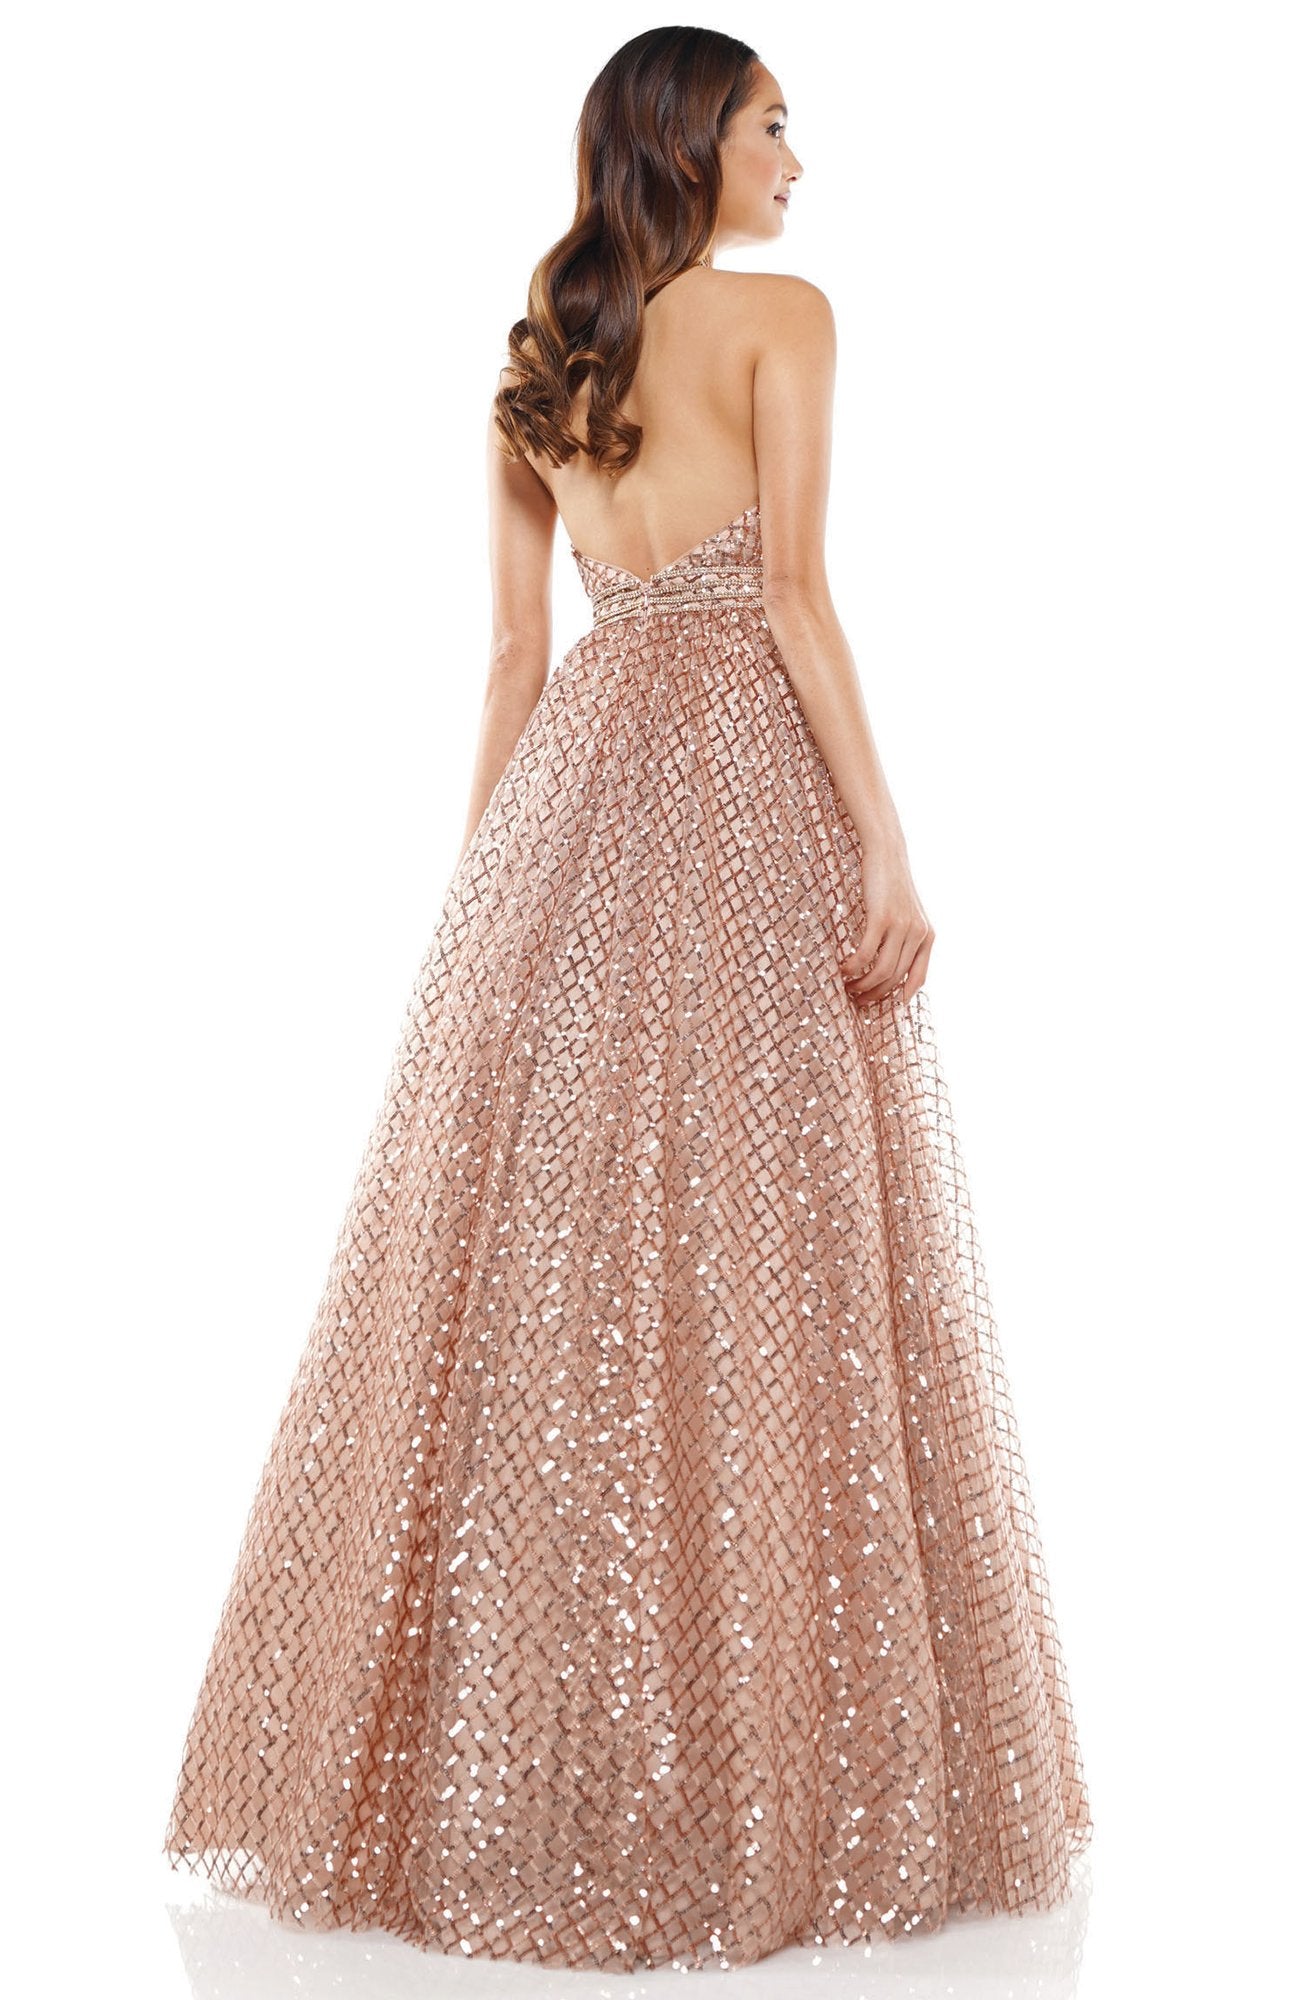 Glow Dress - G916 High Halter Sequined Lattice A-Line Gown In Pink and Gold